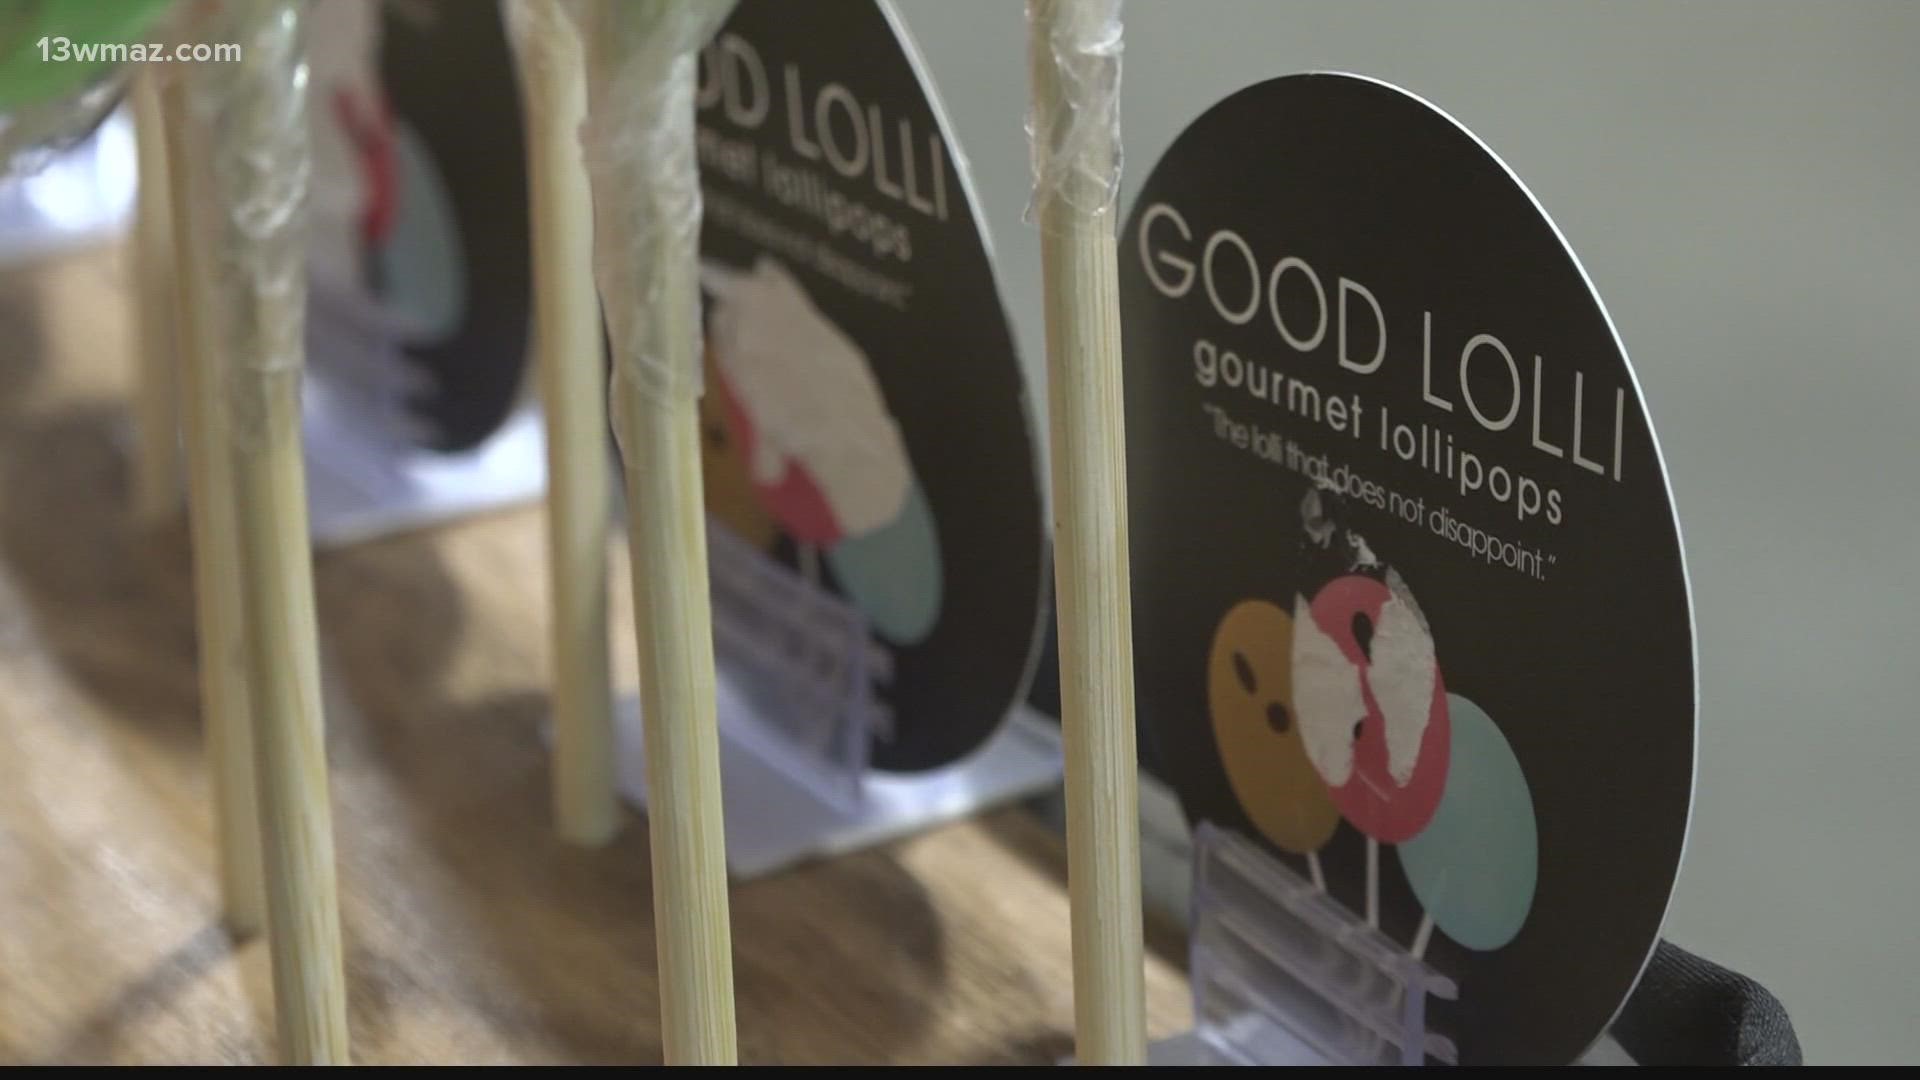 As part of Georgia Grown's partnership at the state fair, Good Lolli is selling some sweet treats.